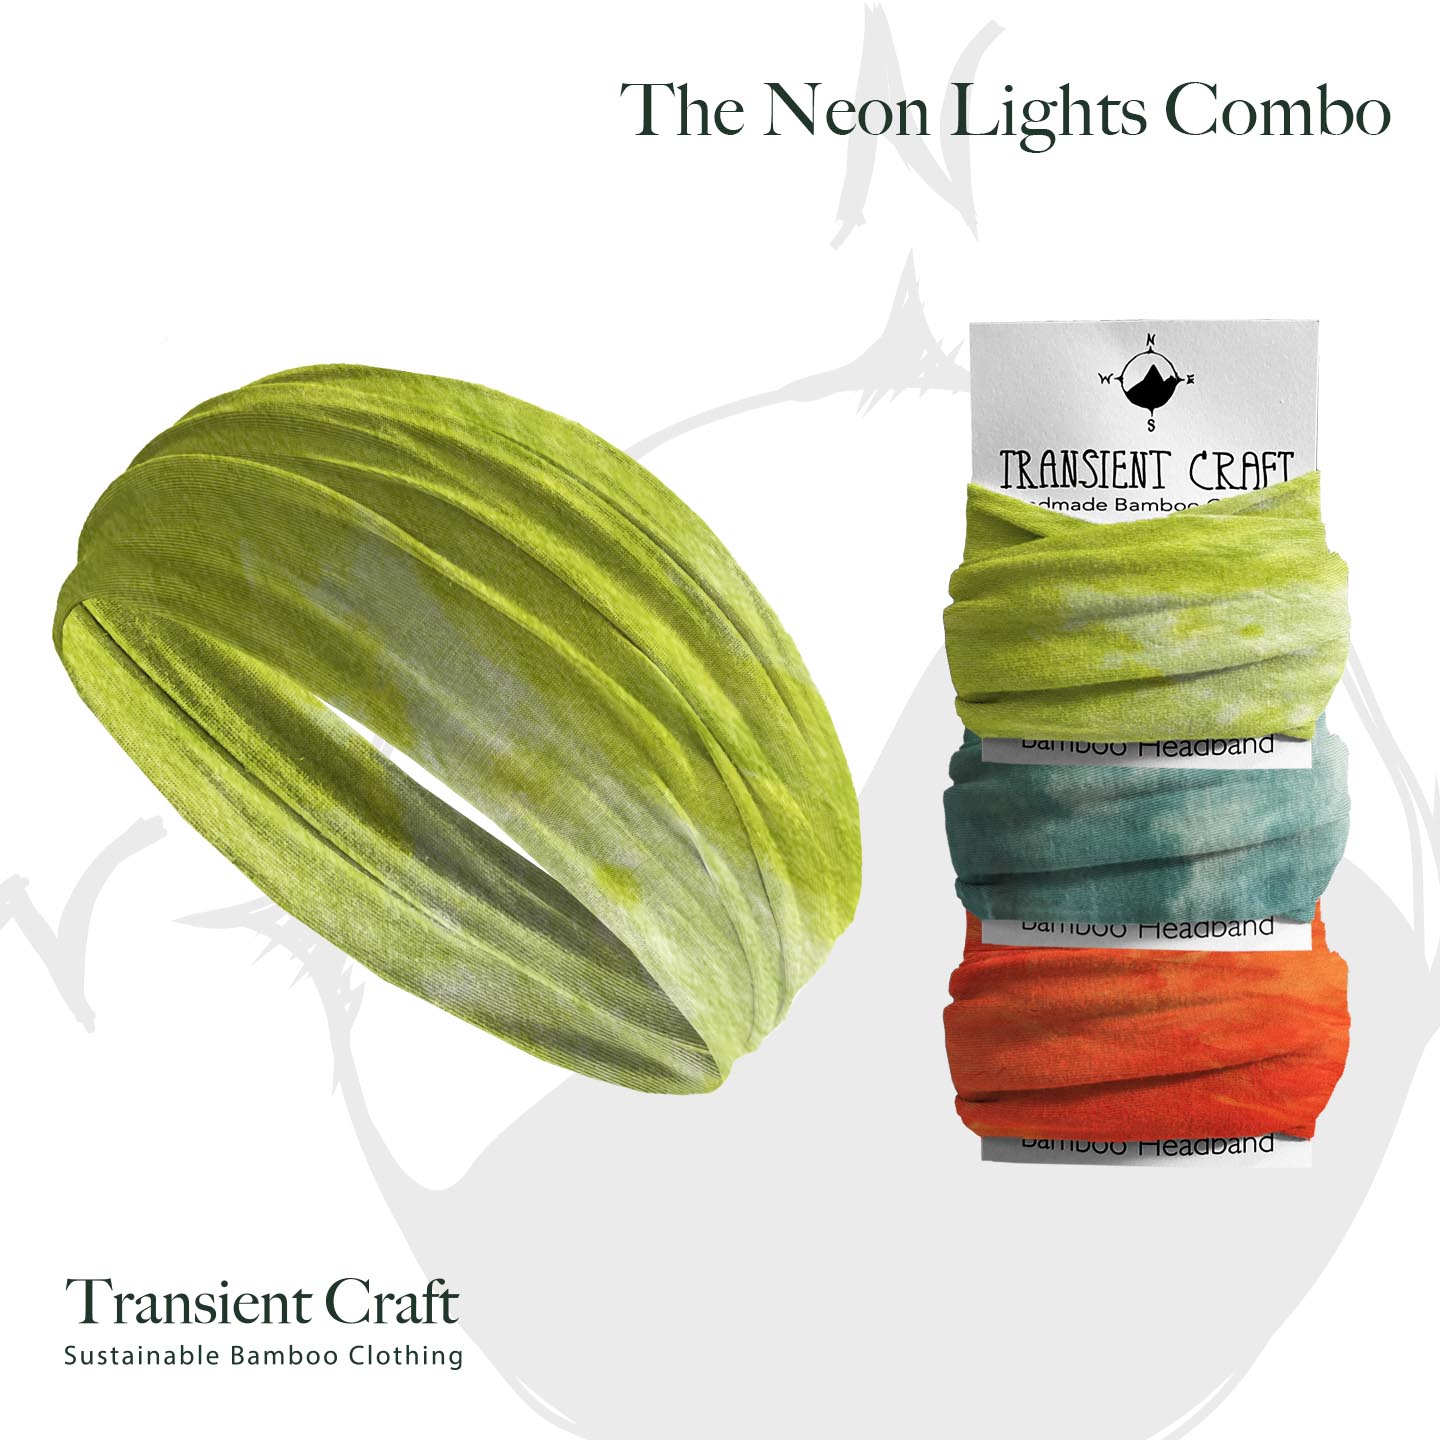 The Eco-Friendly Bamboo Headband 3 Pack - for Running - Neon Lights combo- An Athletic Must-Have